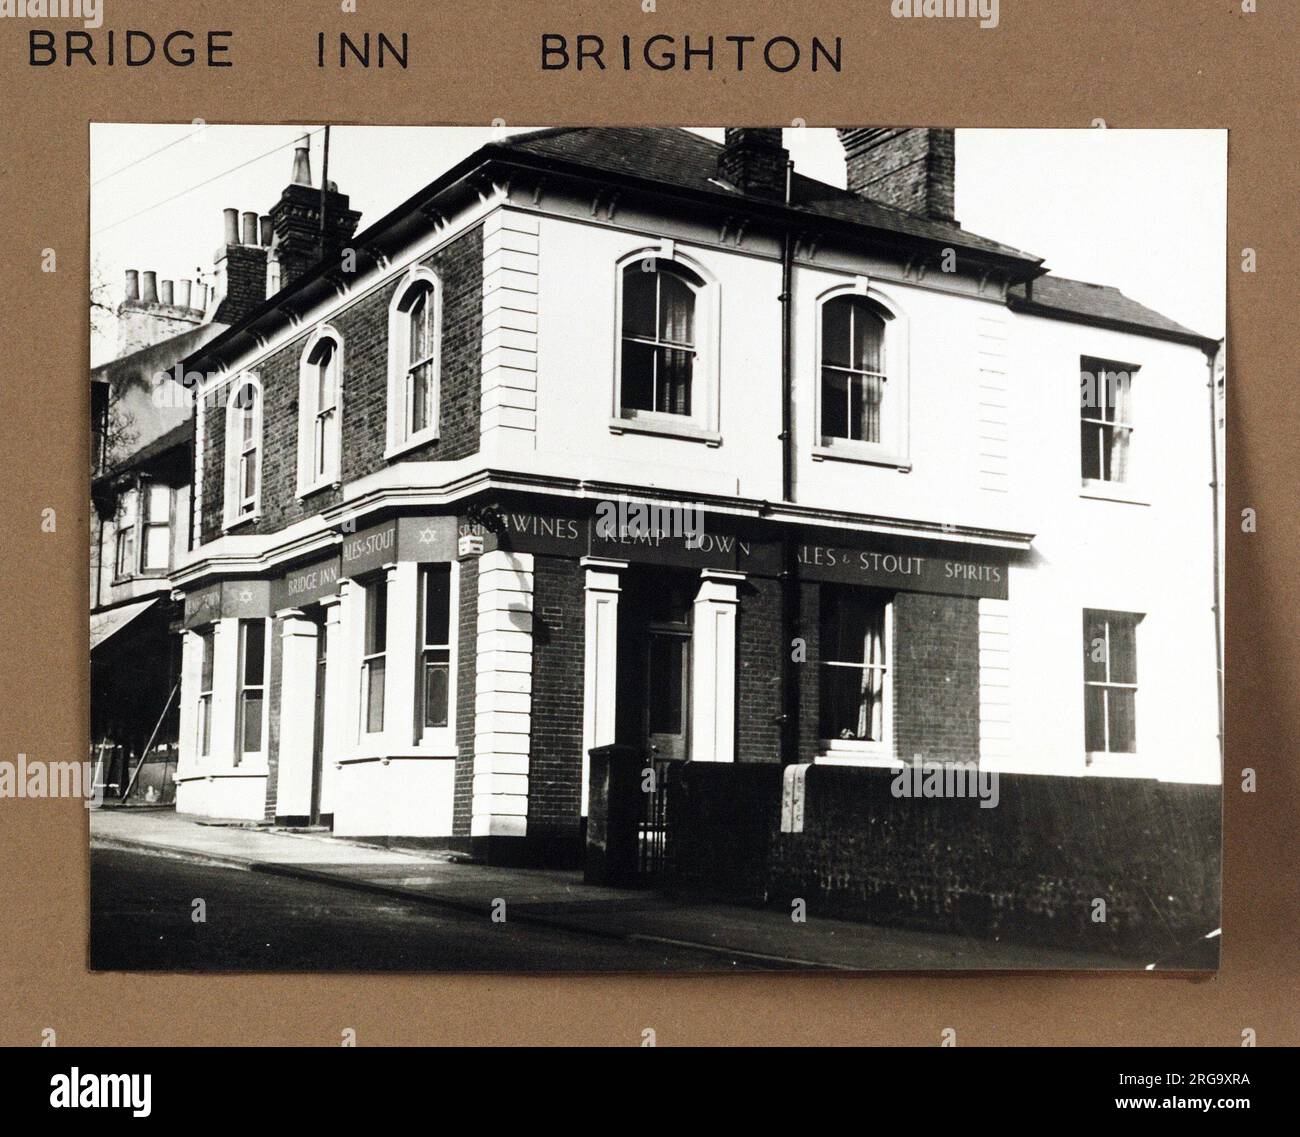 Photograph of Bridge Inn, Brighton, Sussex. The main side of the print (shown here) depicts: Corner on view of the pub.  The back of the print (available on request) details: Nothing for the Bridge Inn, Brighton, Sussex BN1 3TU. As of July 2018 . Demolished Stock Photo